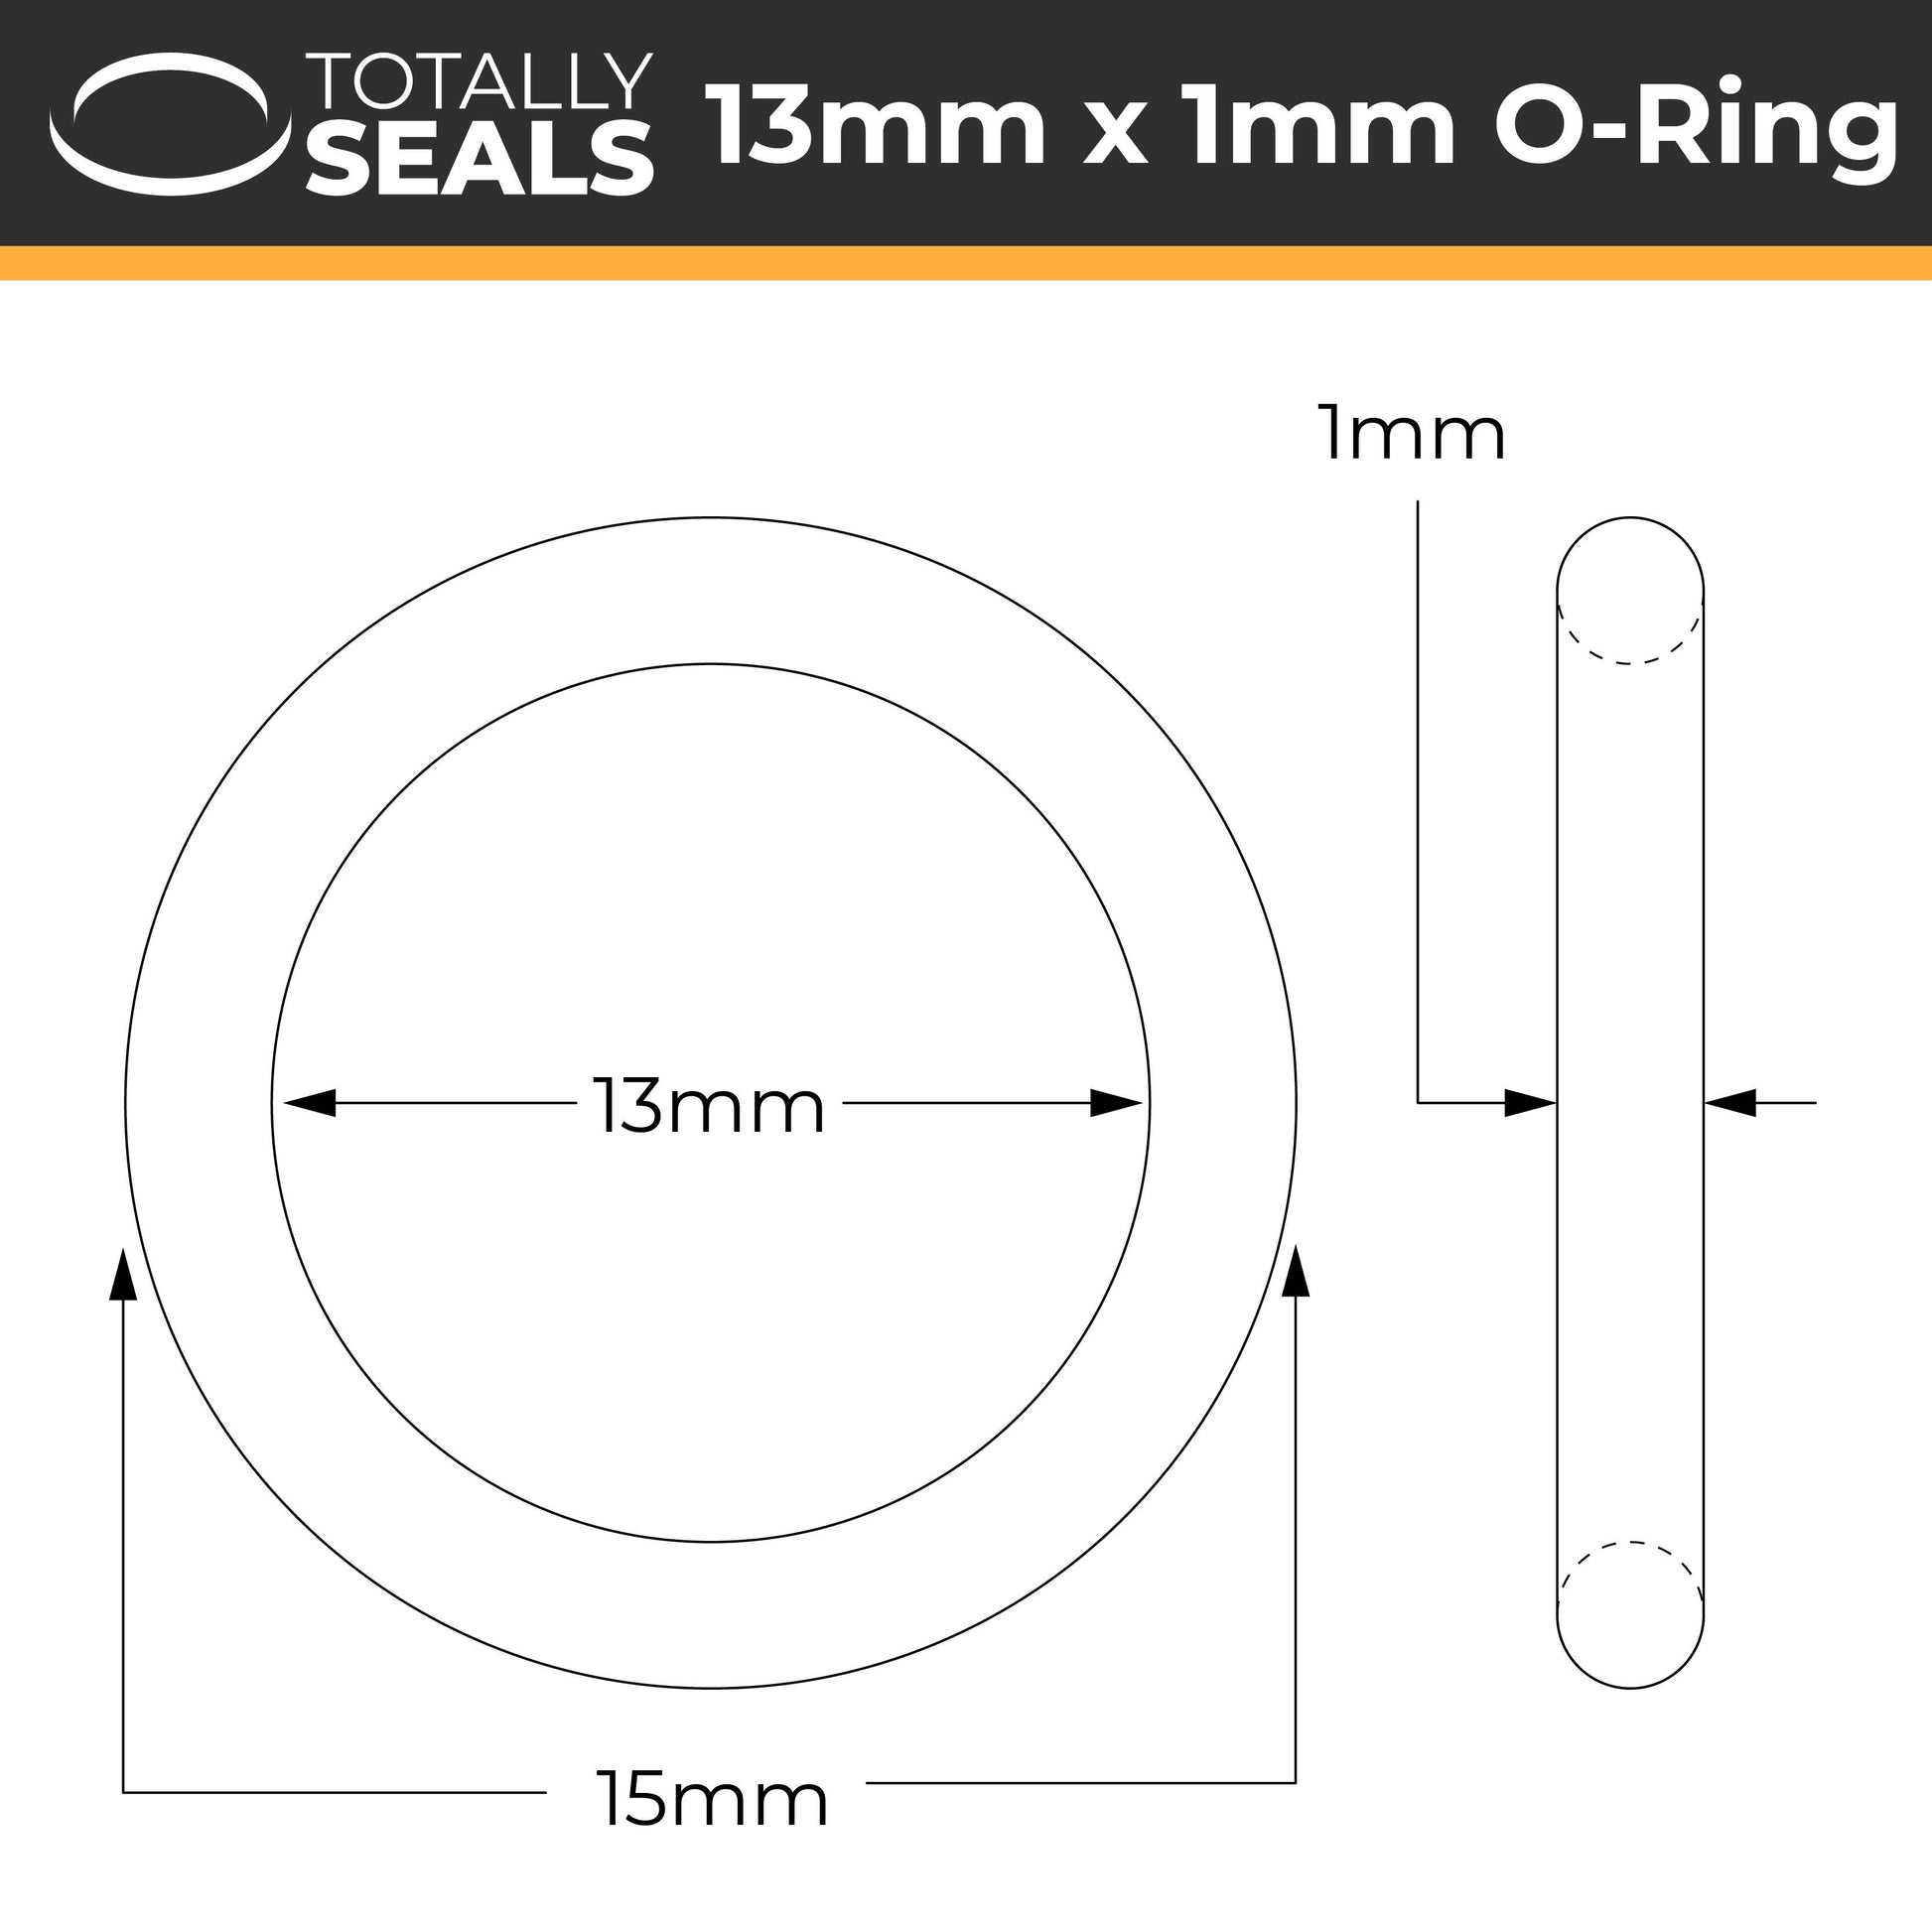 13mm x 1mm (15mm OD) Nitrile O-Rings - Totally Seals®